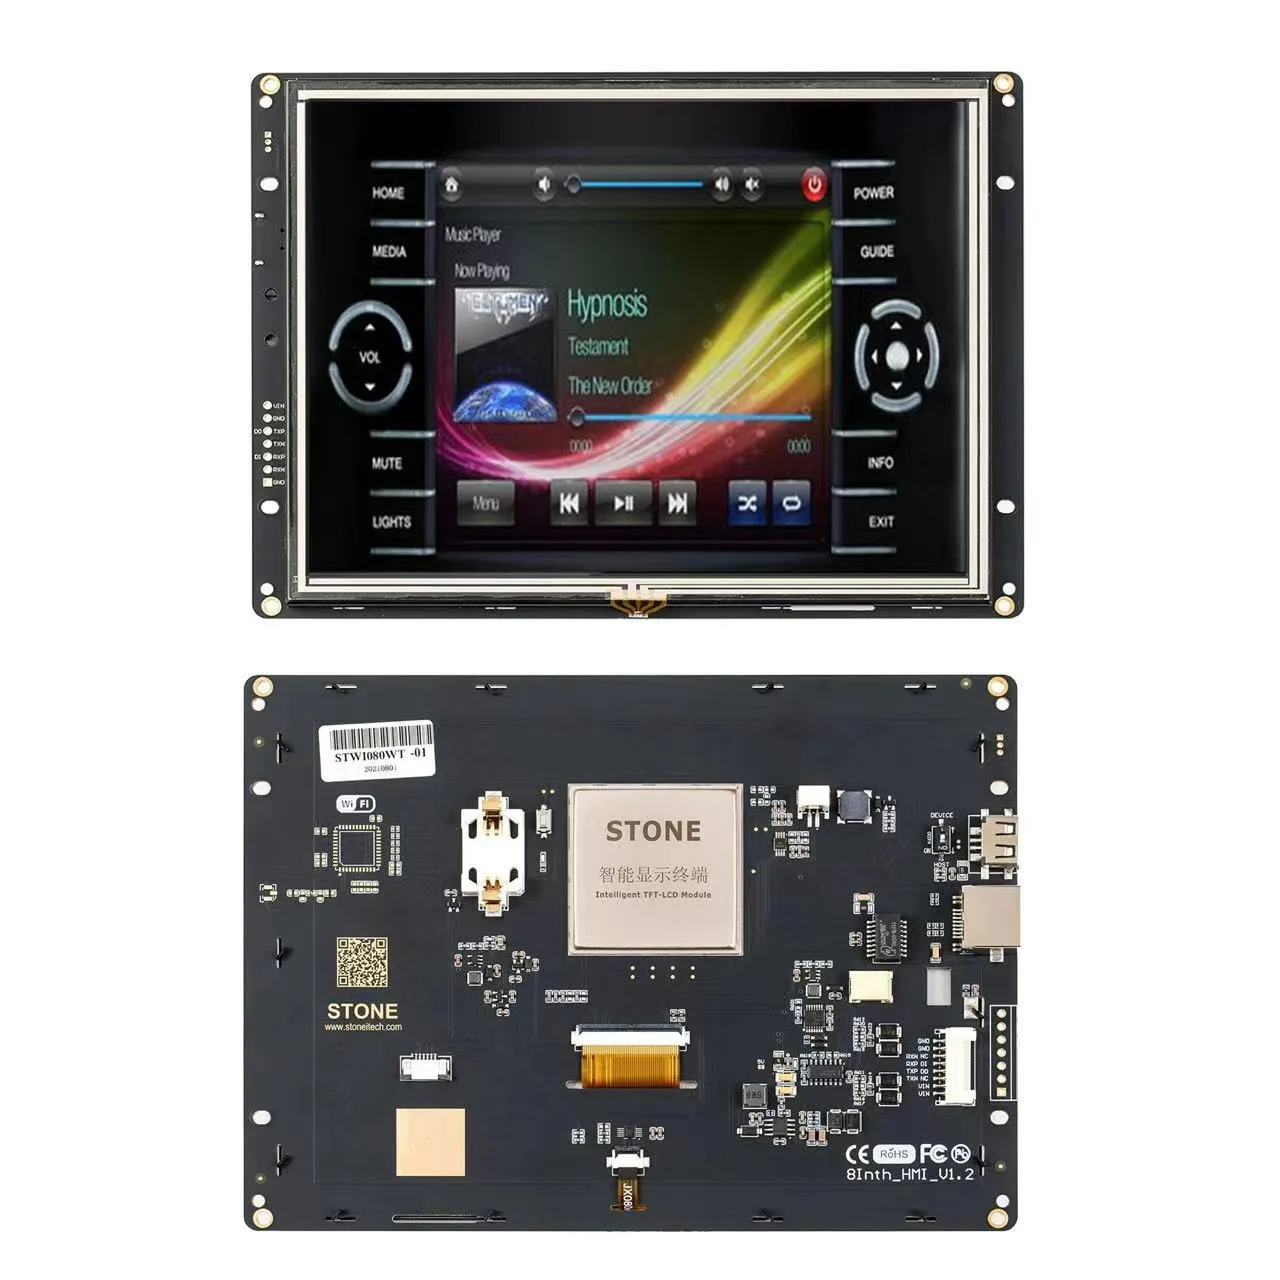 SCBRHMI 8 Inch Full Color LCD Display HMI Resistive Touch Screen Built-In RTC With RS232 Port for Arduino